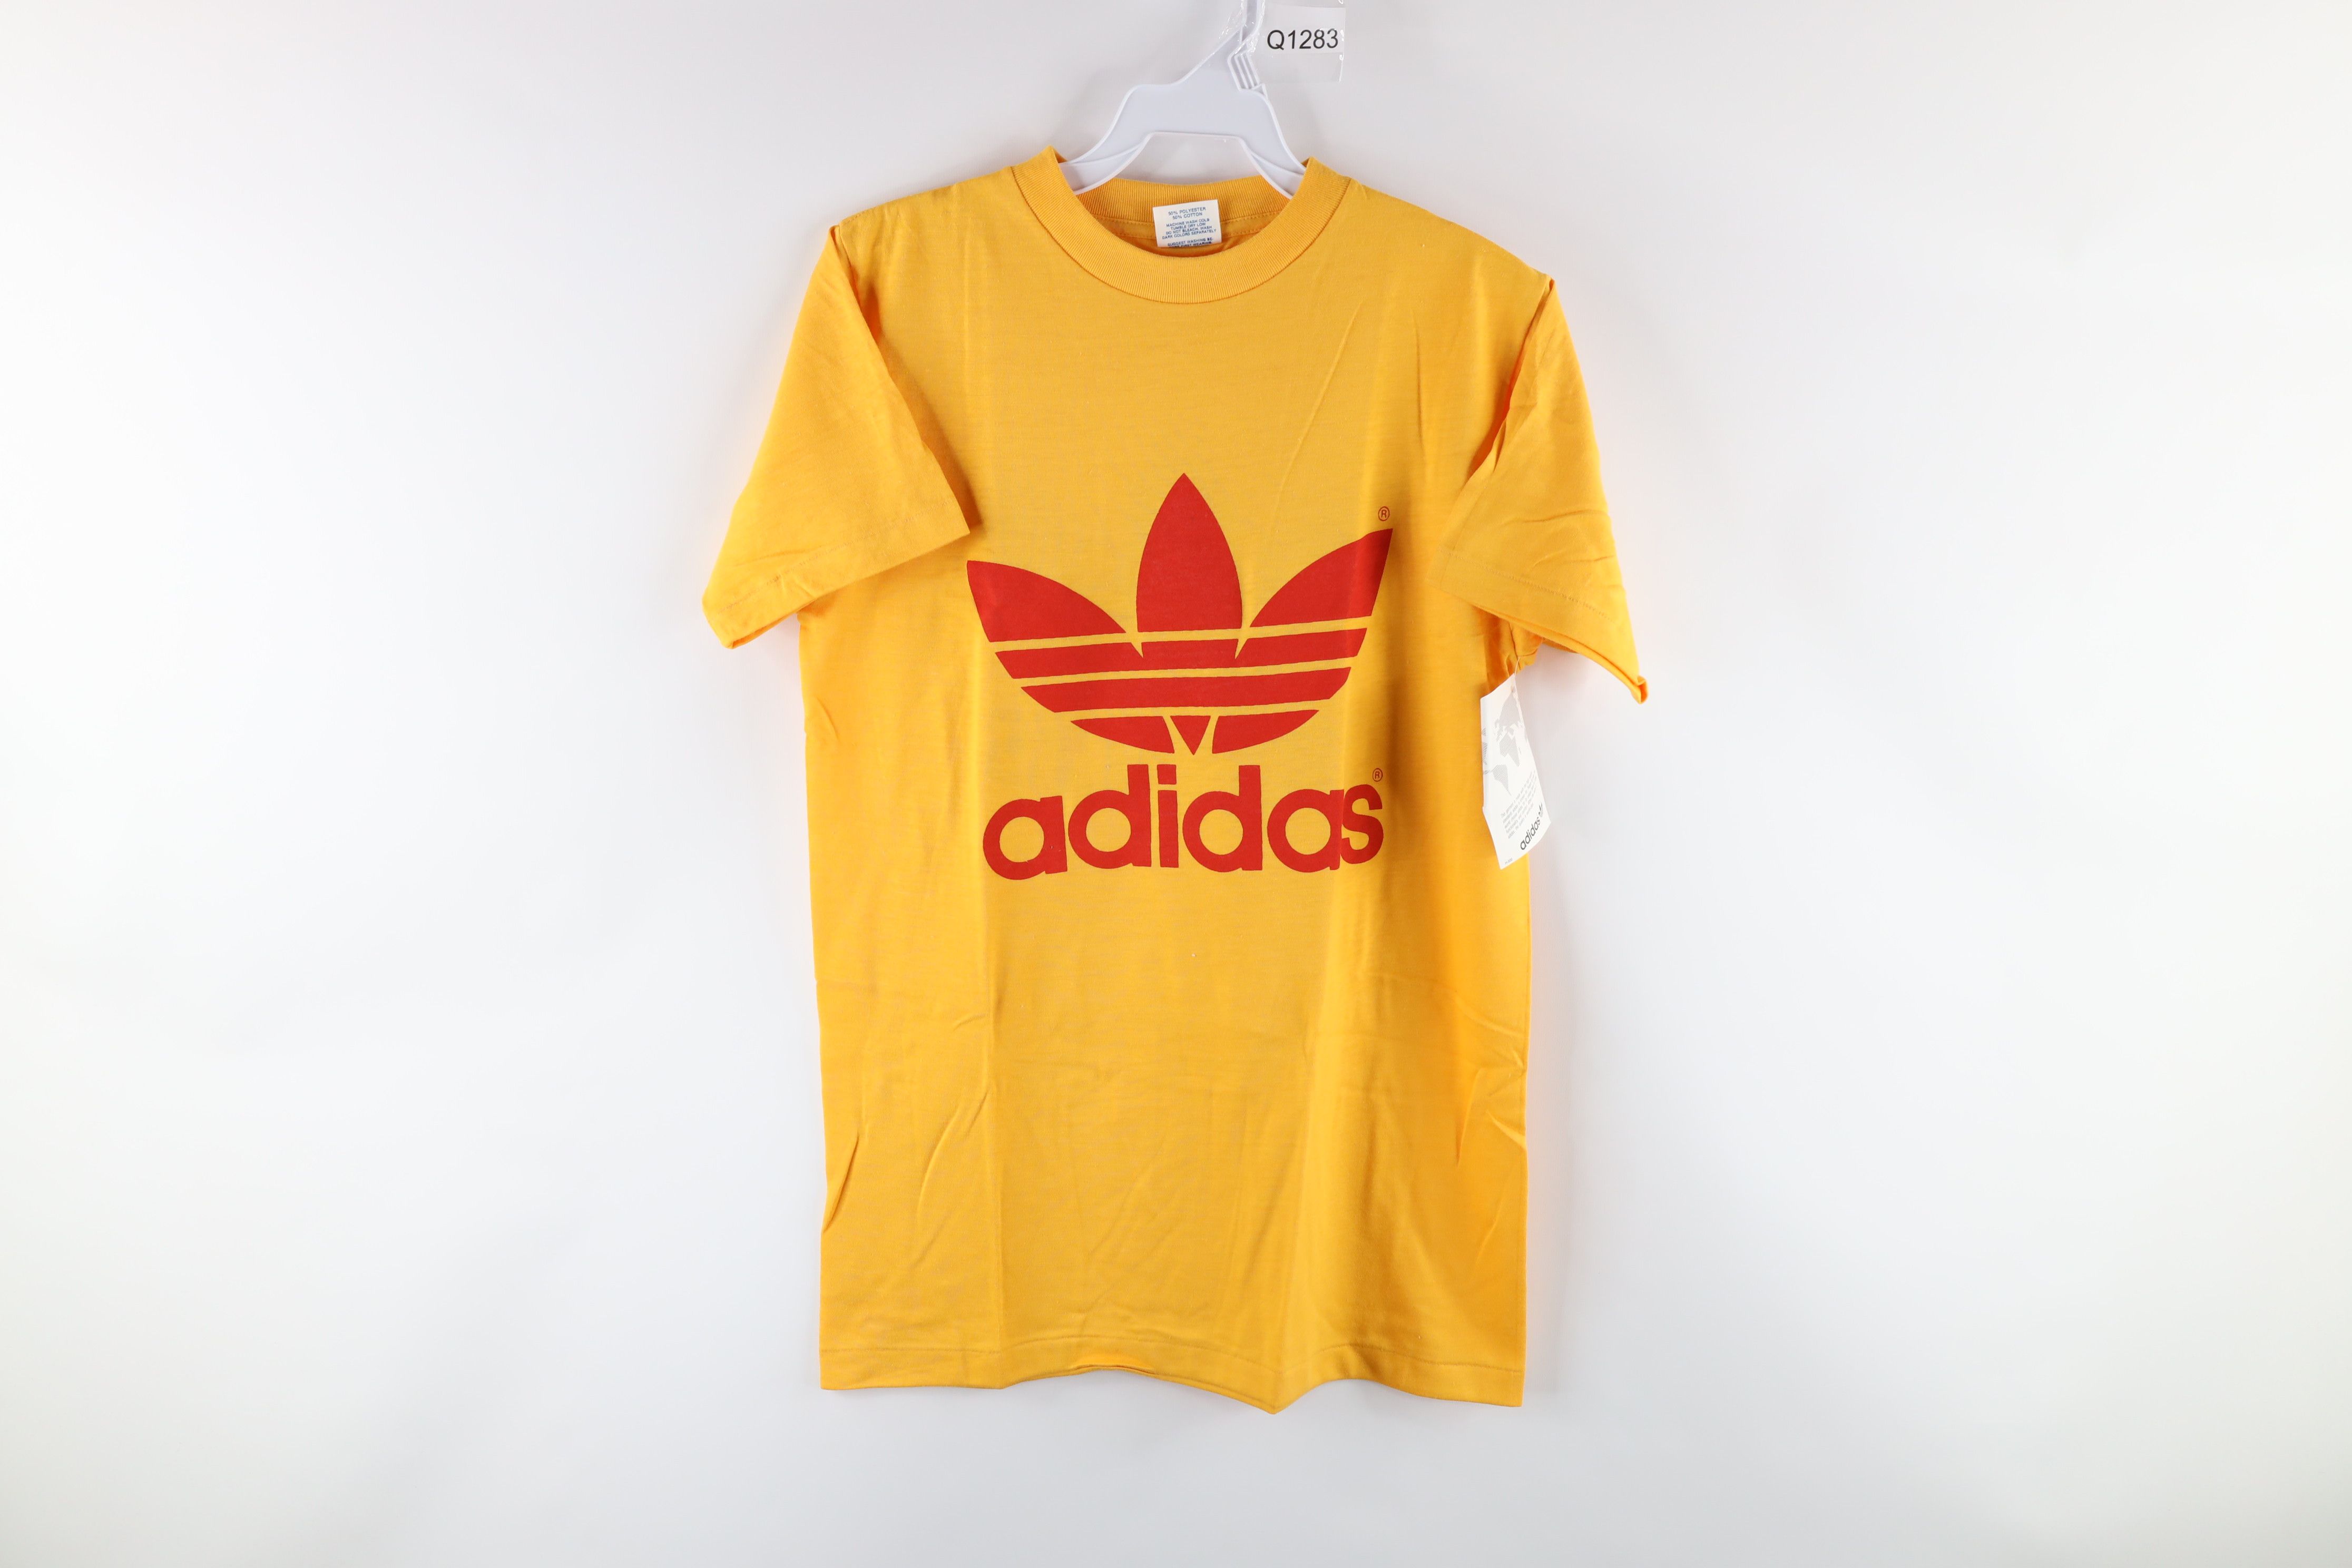 Adidas NOS Vintage 80s Adidas Trefoil 1988 Olympics T-Shirt Yellow Size US S / EU 44-46 / 1 - 1 Preview